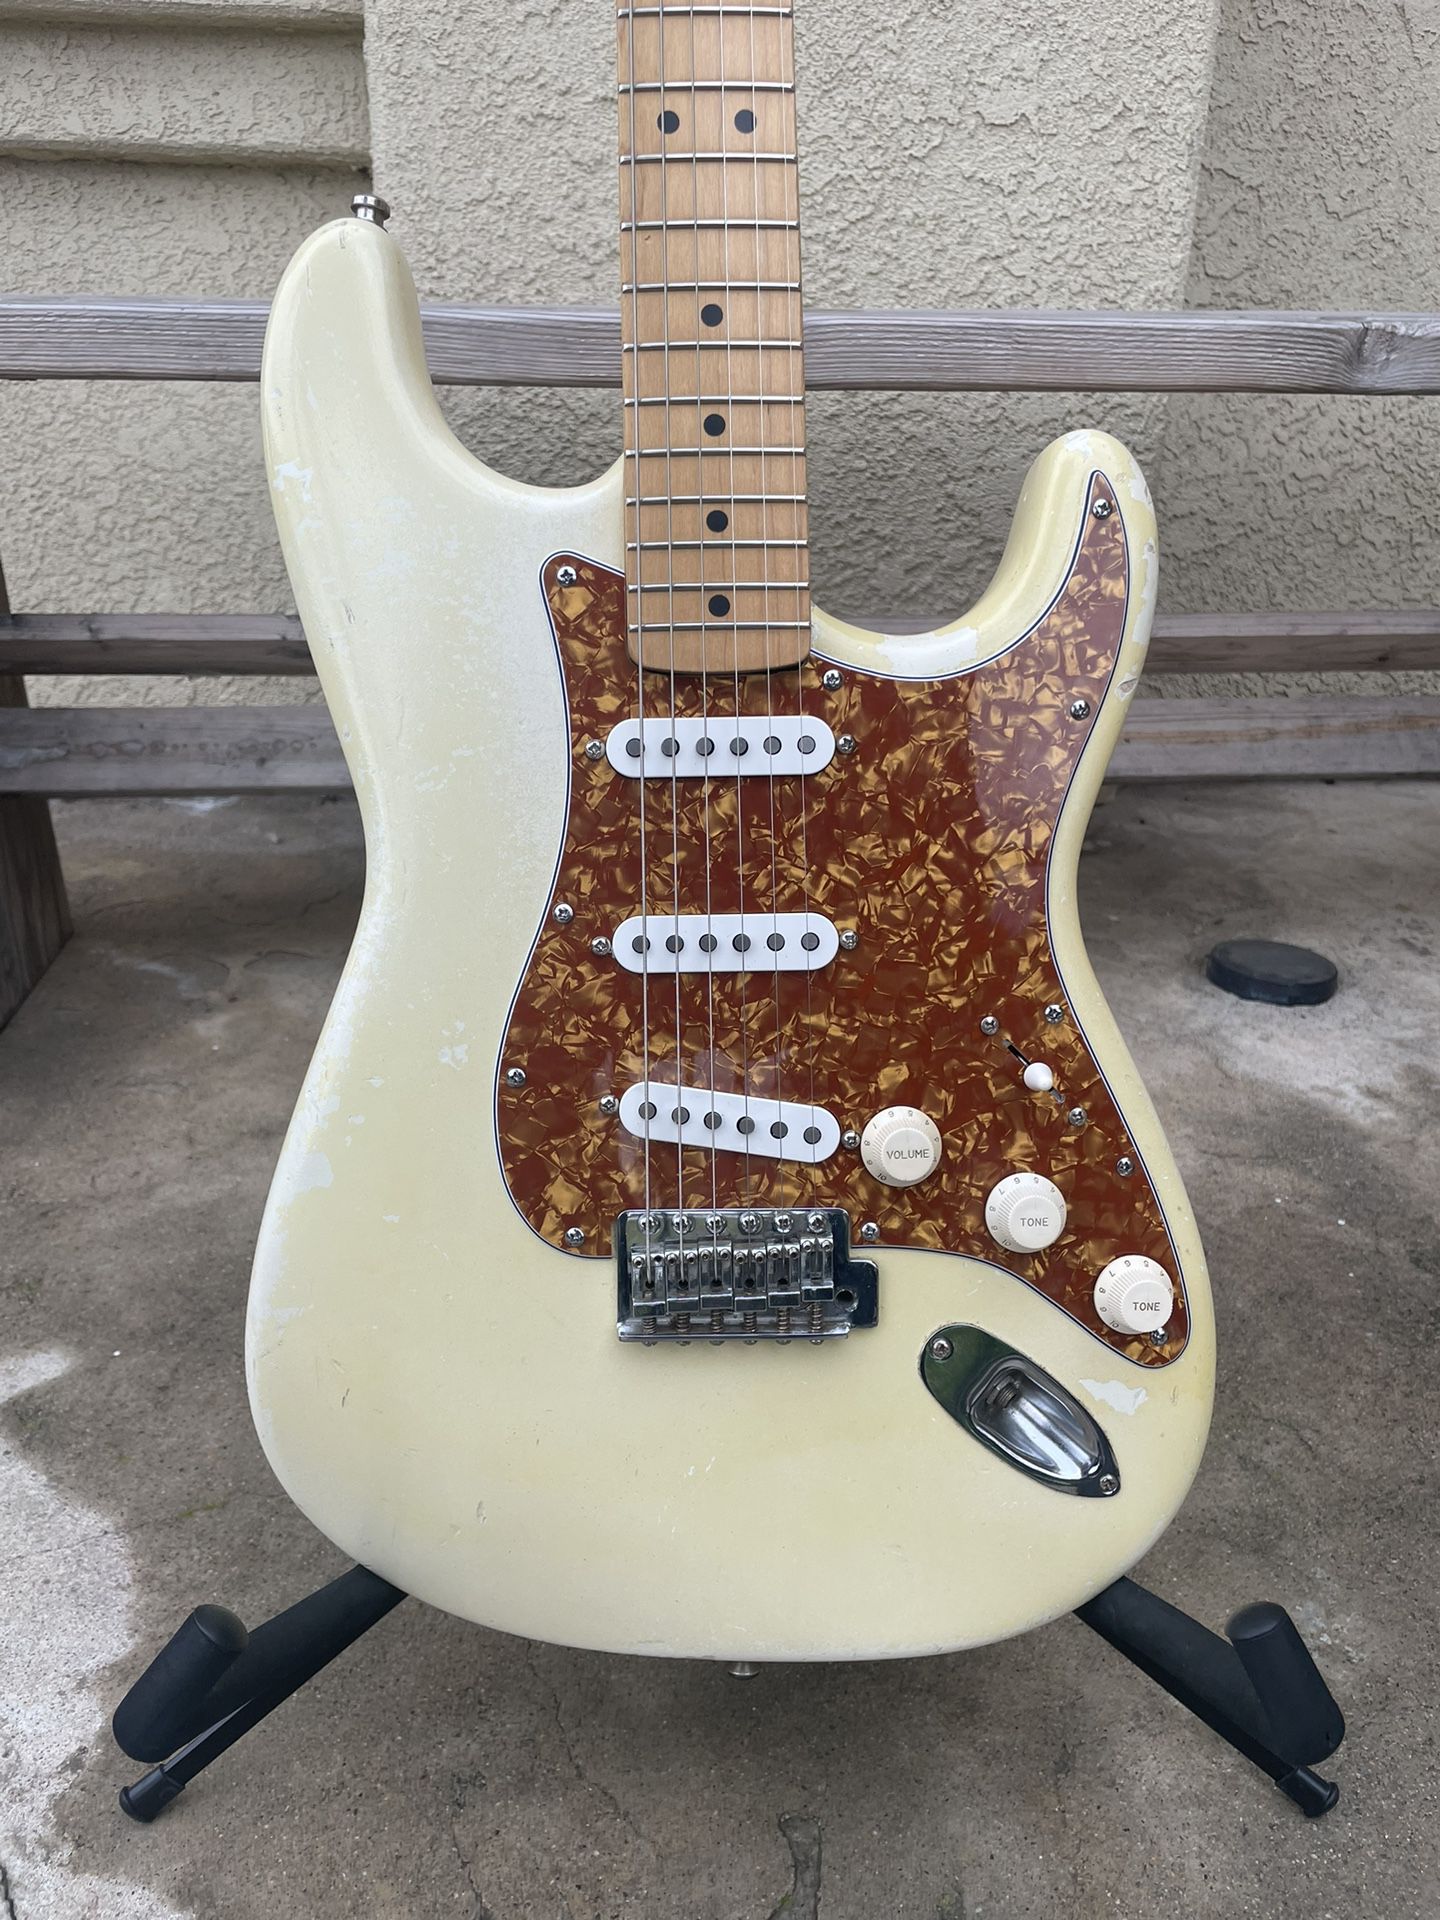 Beautiful Fender Stratocaster For Sale